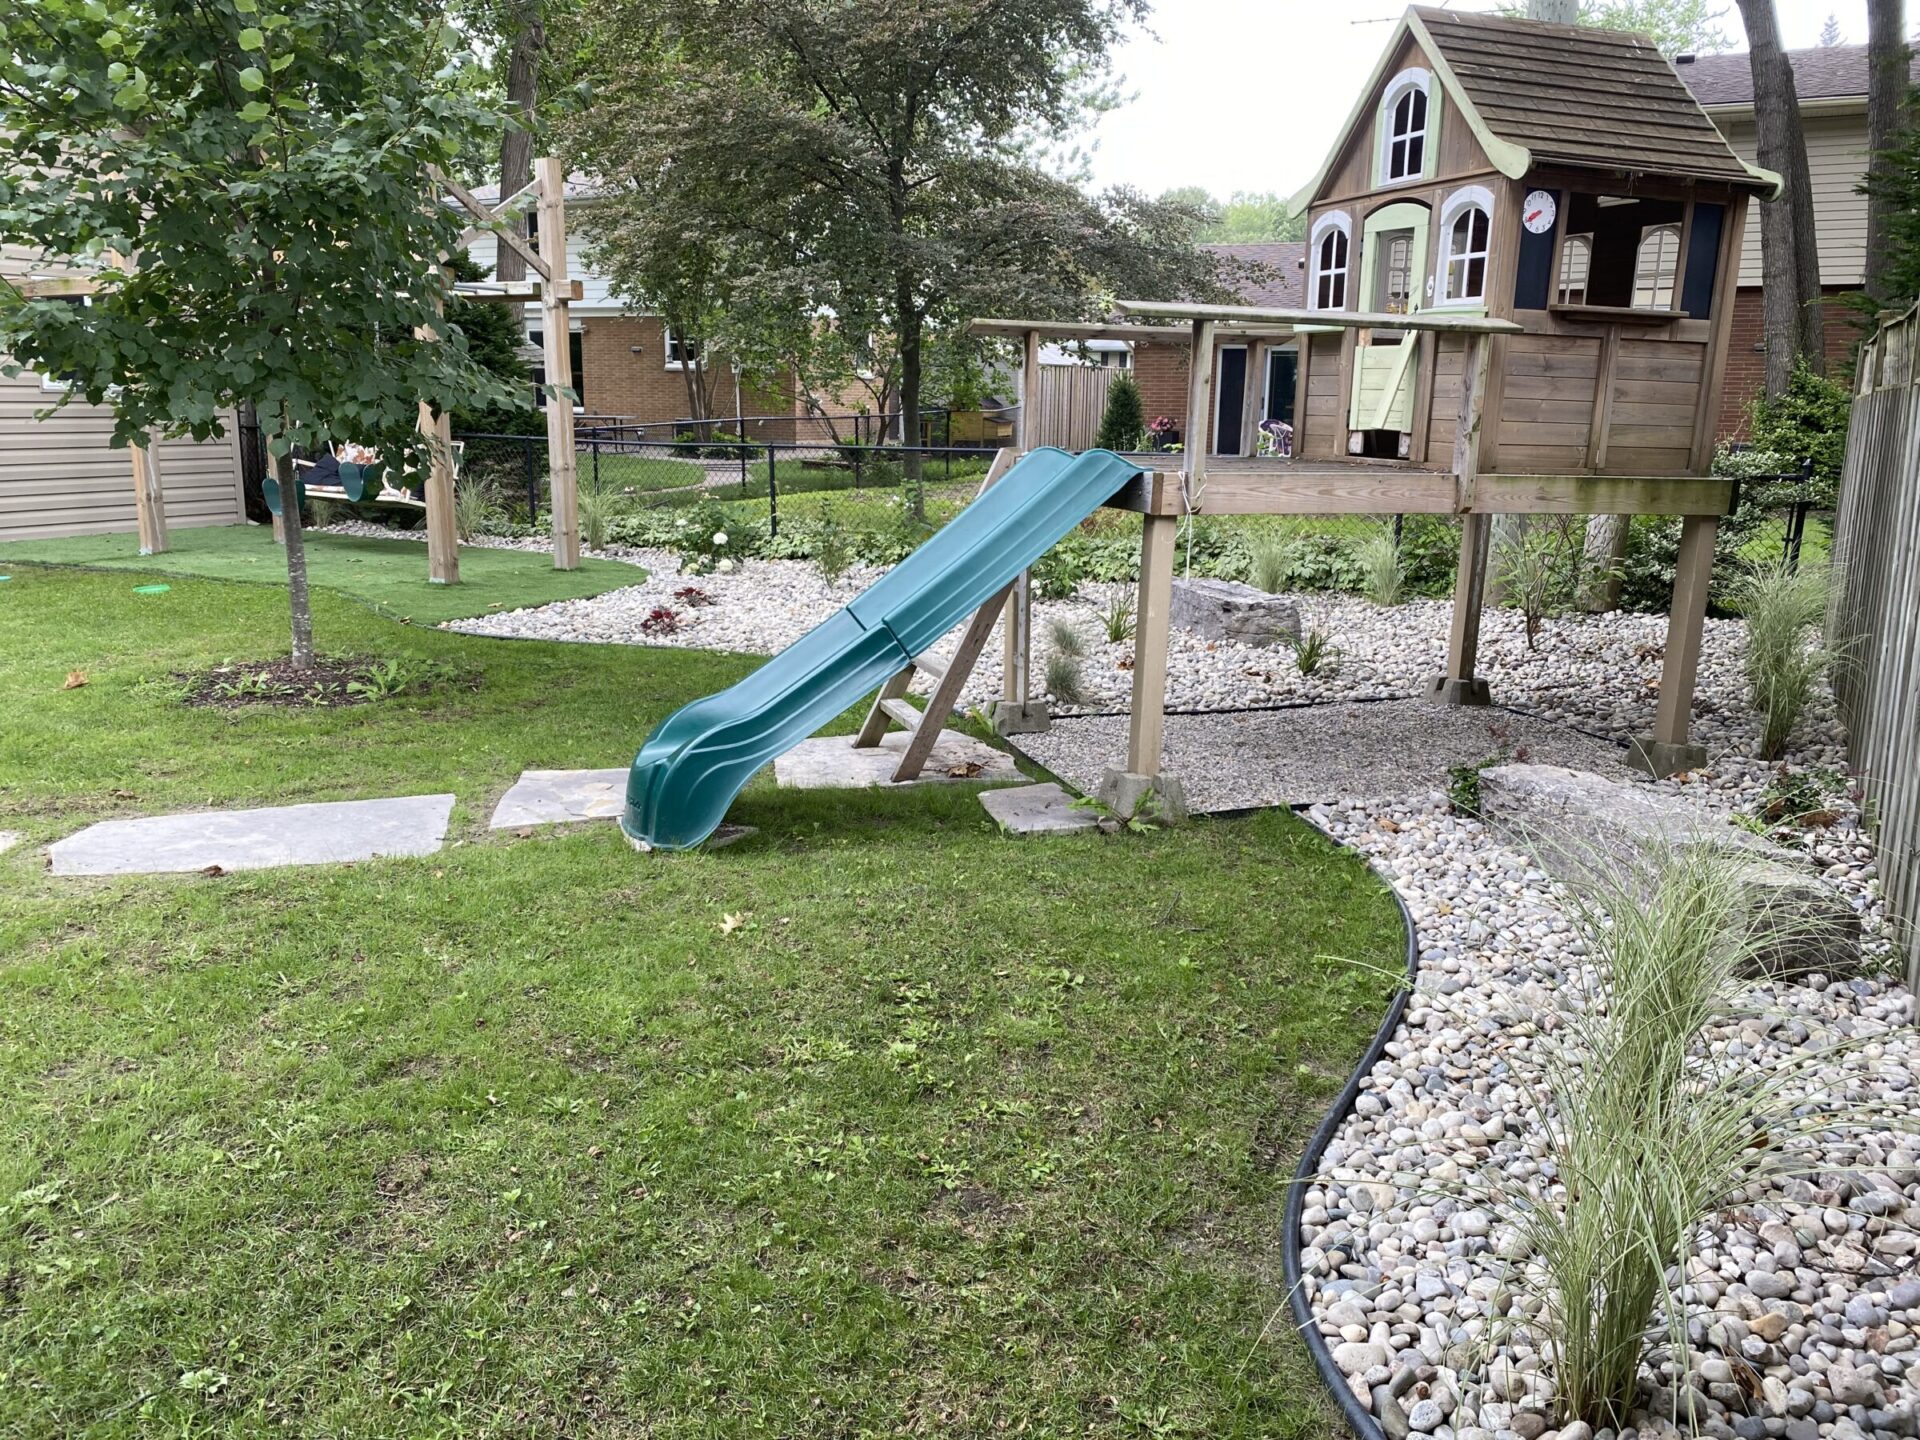 A backyard playhouse on stilts with a green slide, surrounded by a landscaped yard with stepping stones, green grass, and decorative gravel.